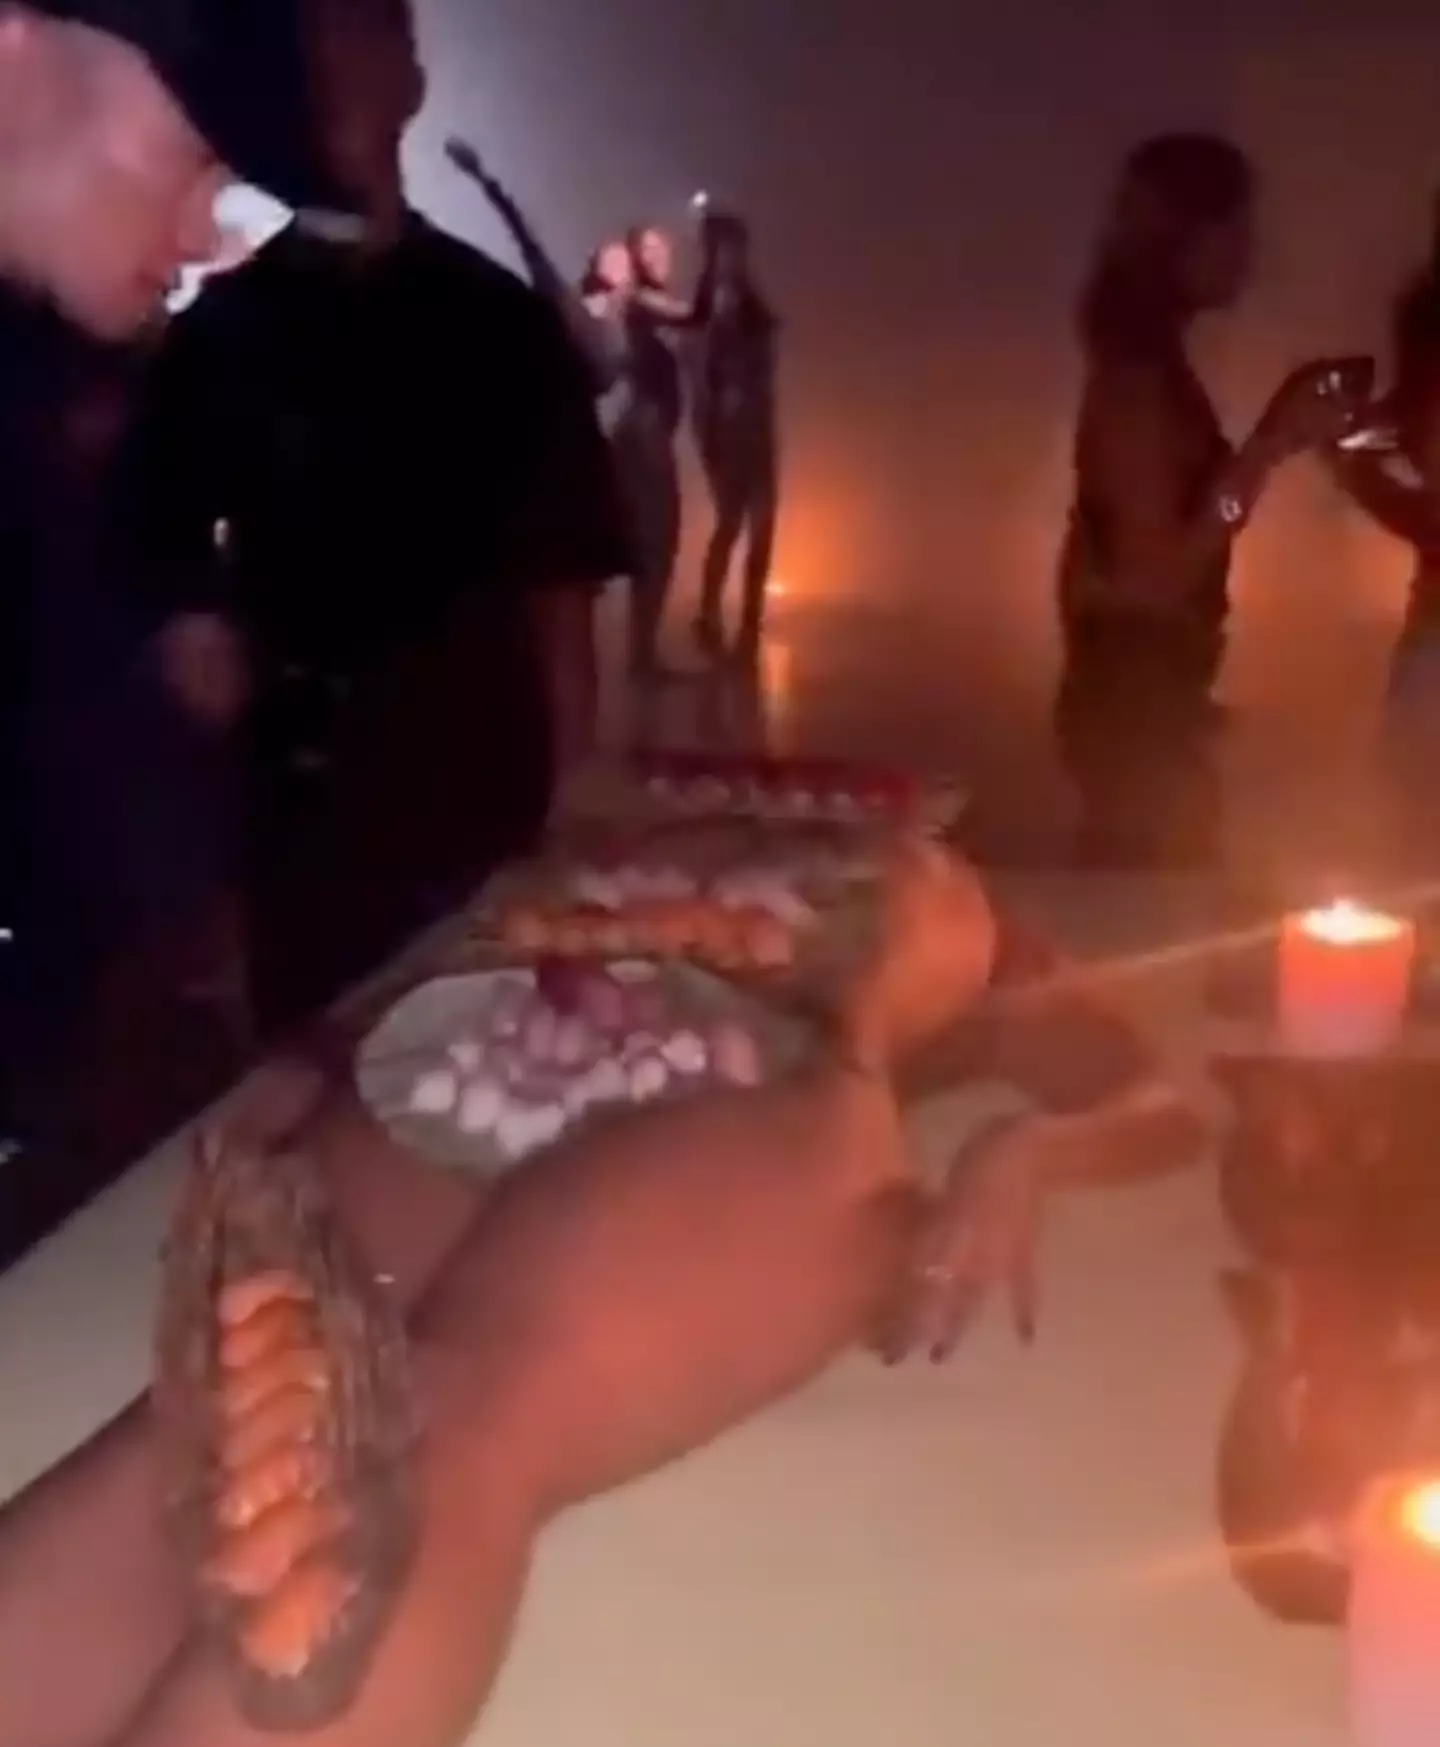 Nyotaimori involves eating sushi off a naked woman, which Kanye West opted for during his 46th birthday party.